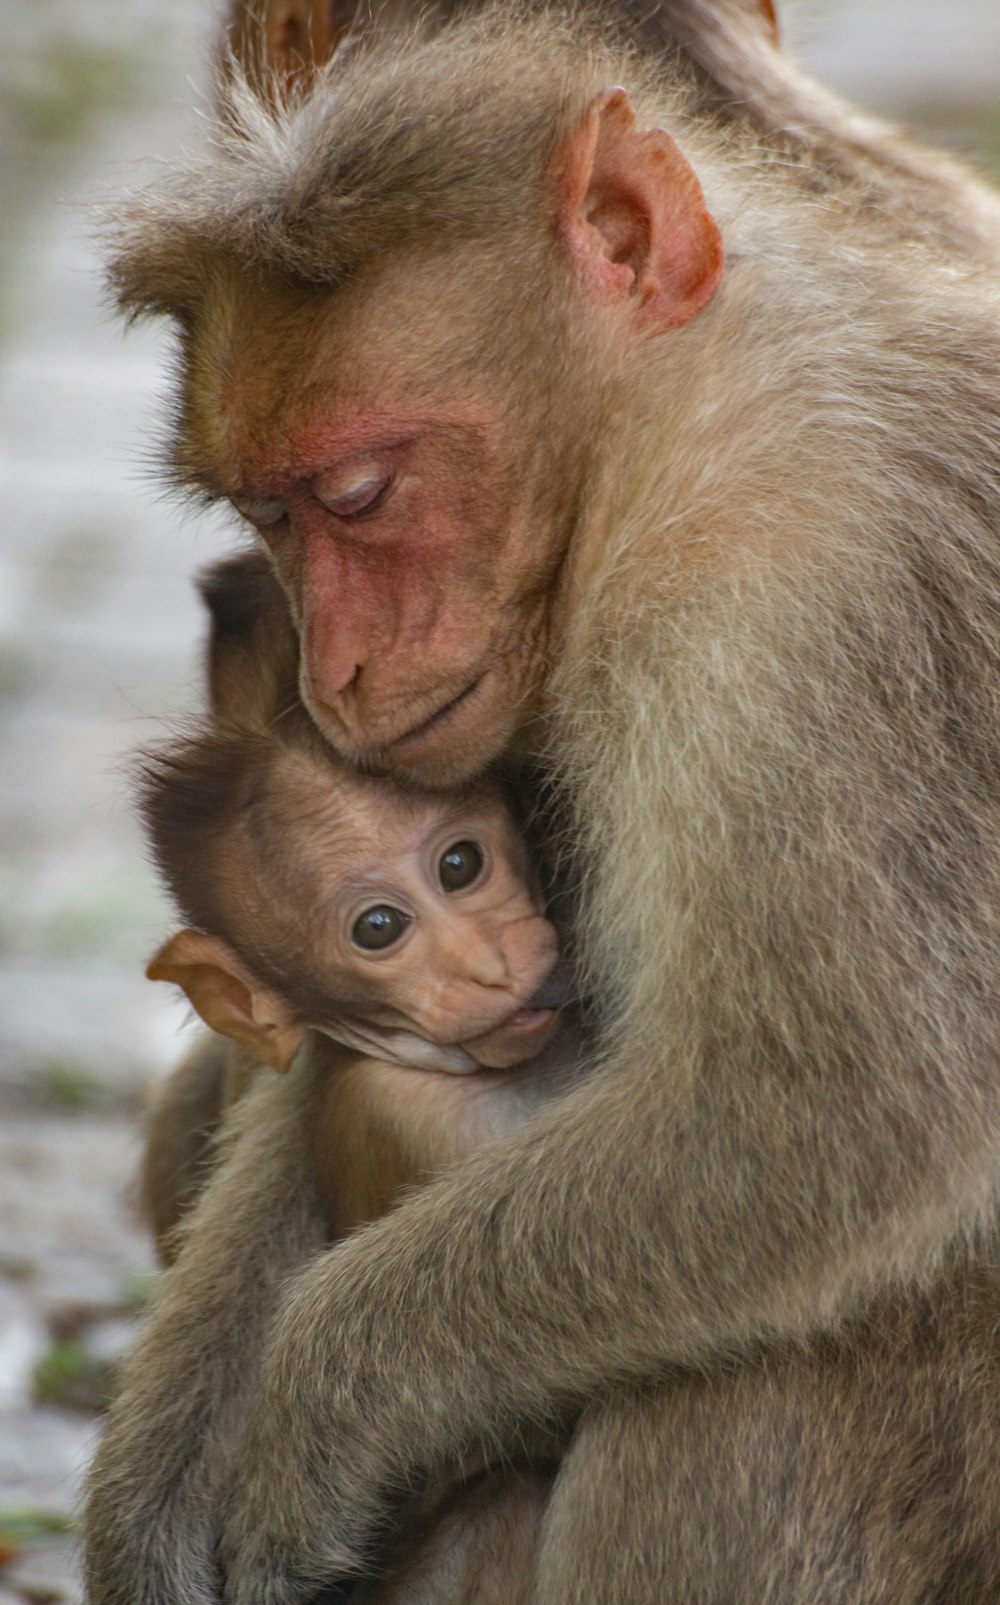 a mother and baby monkey cuddling together